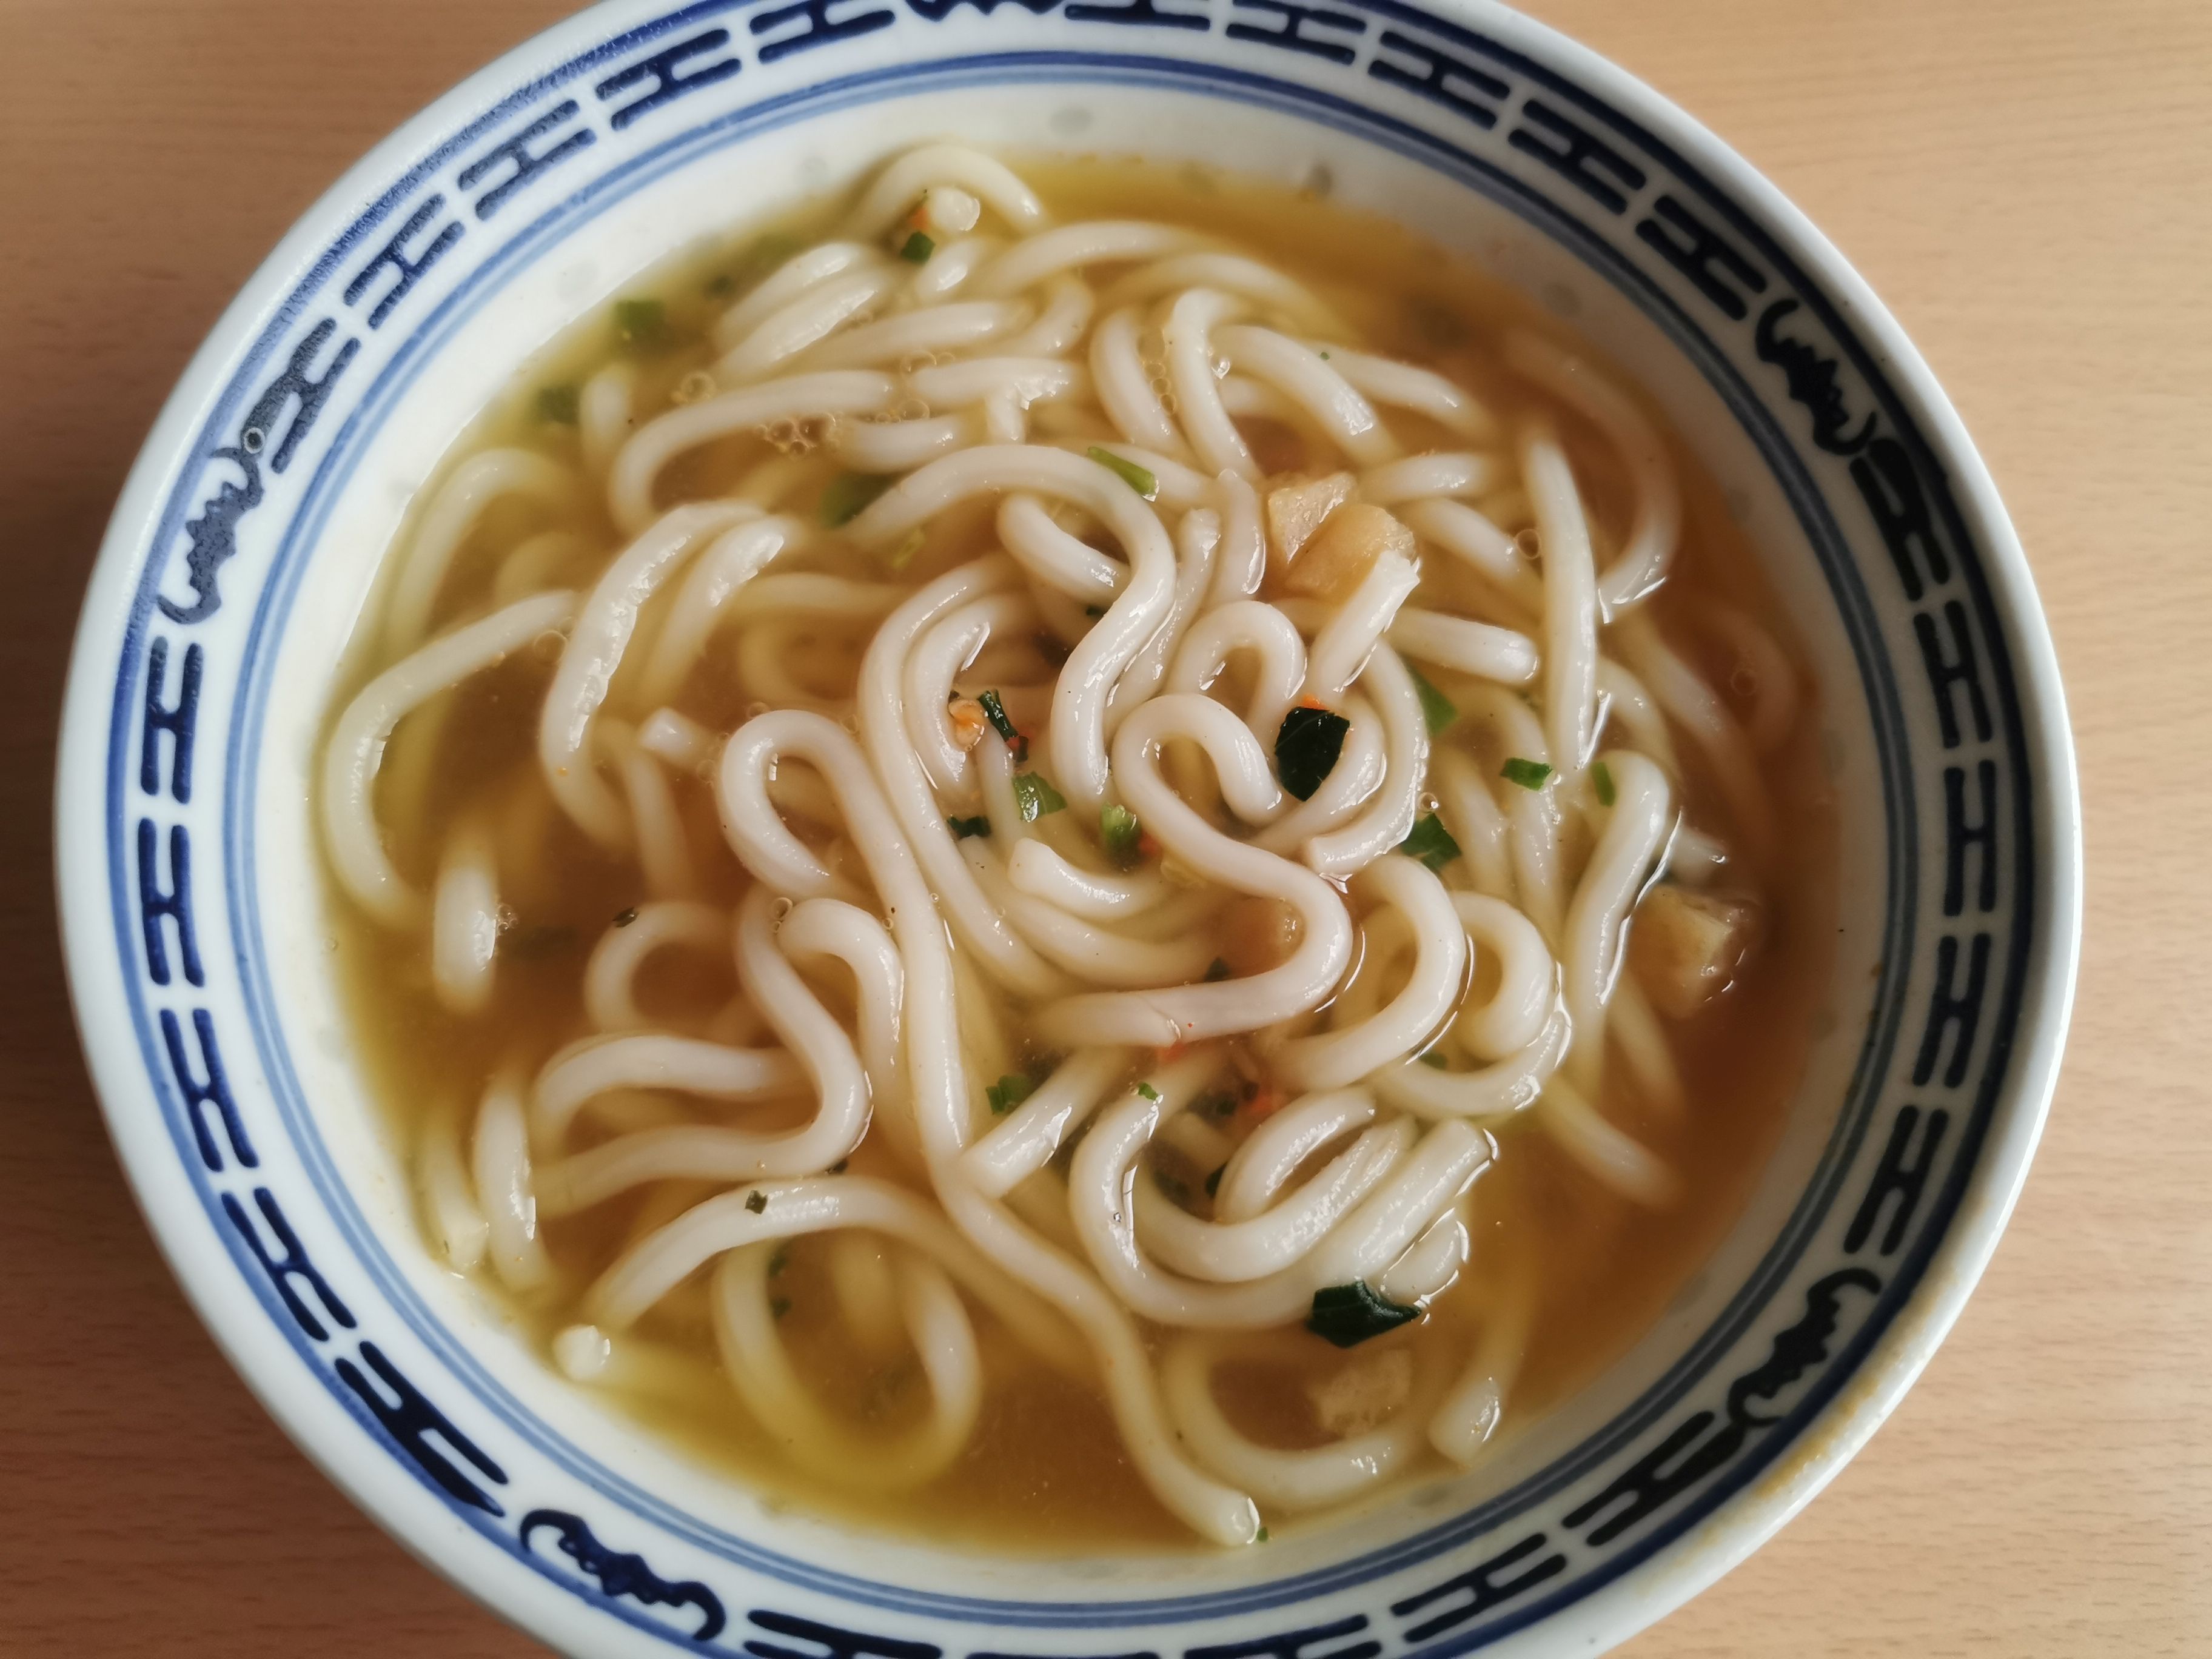 #2070: all groo "Udon Instant-Noodles Miso"